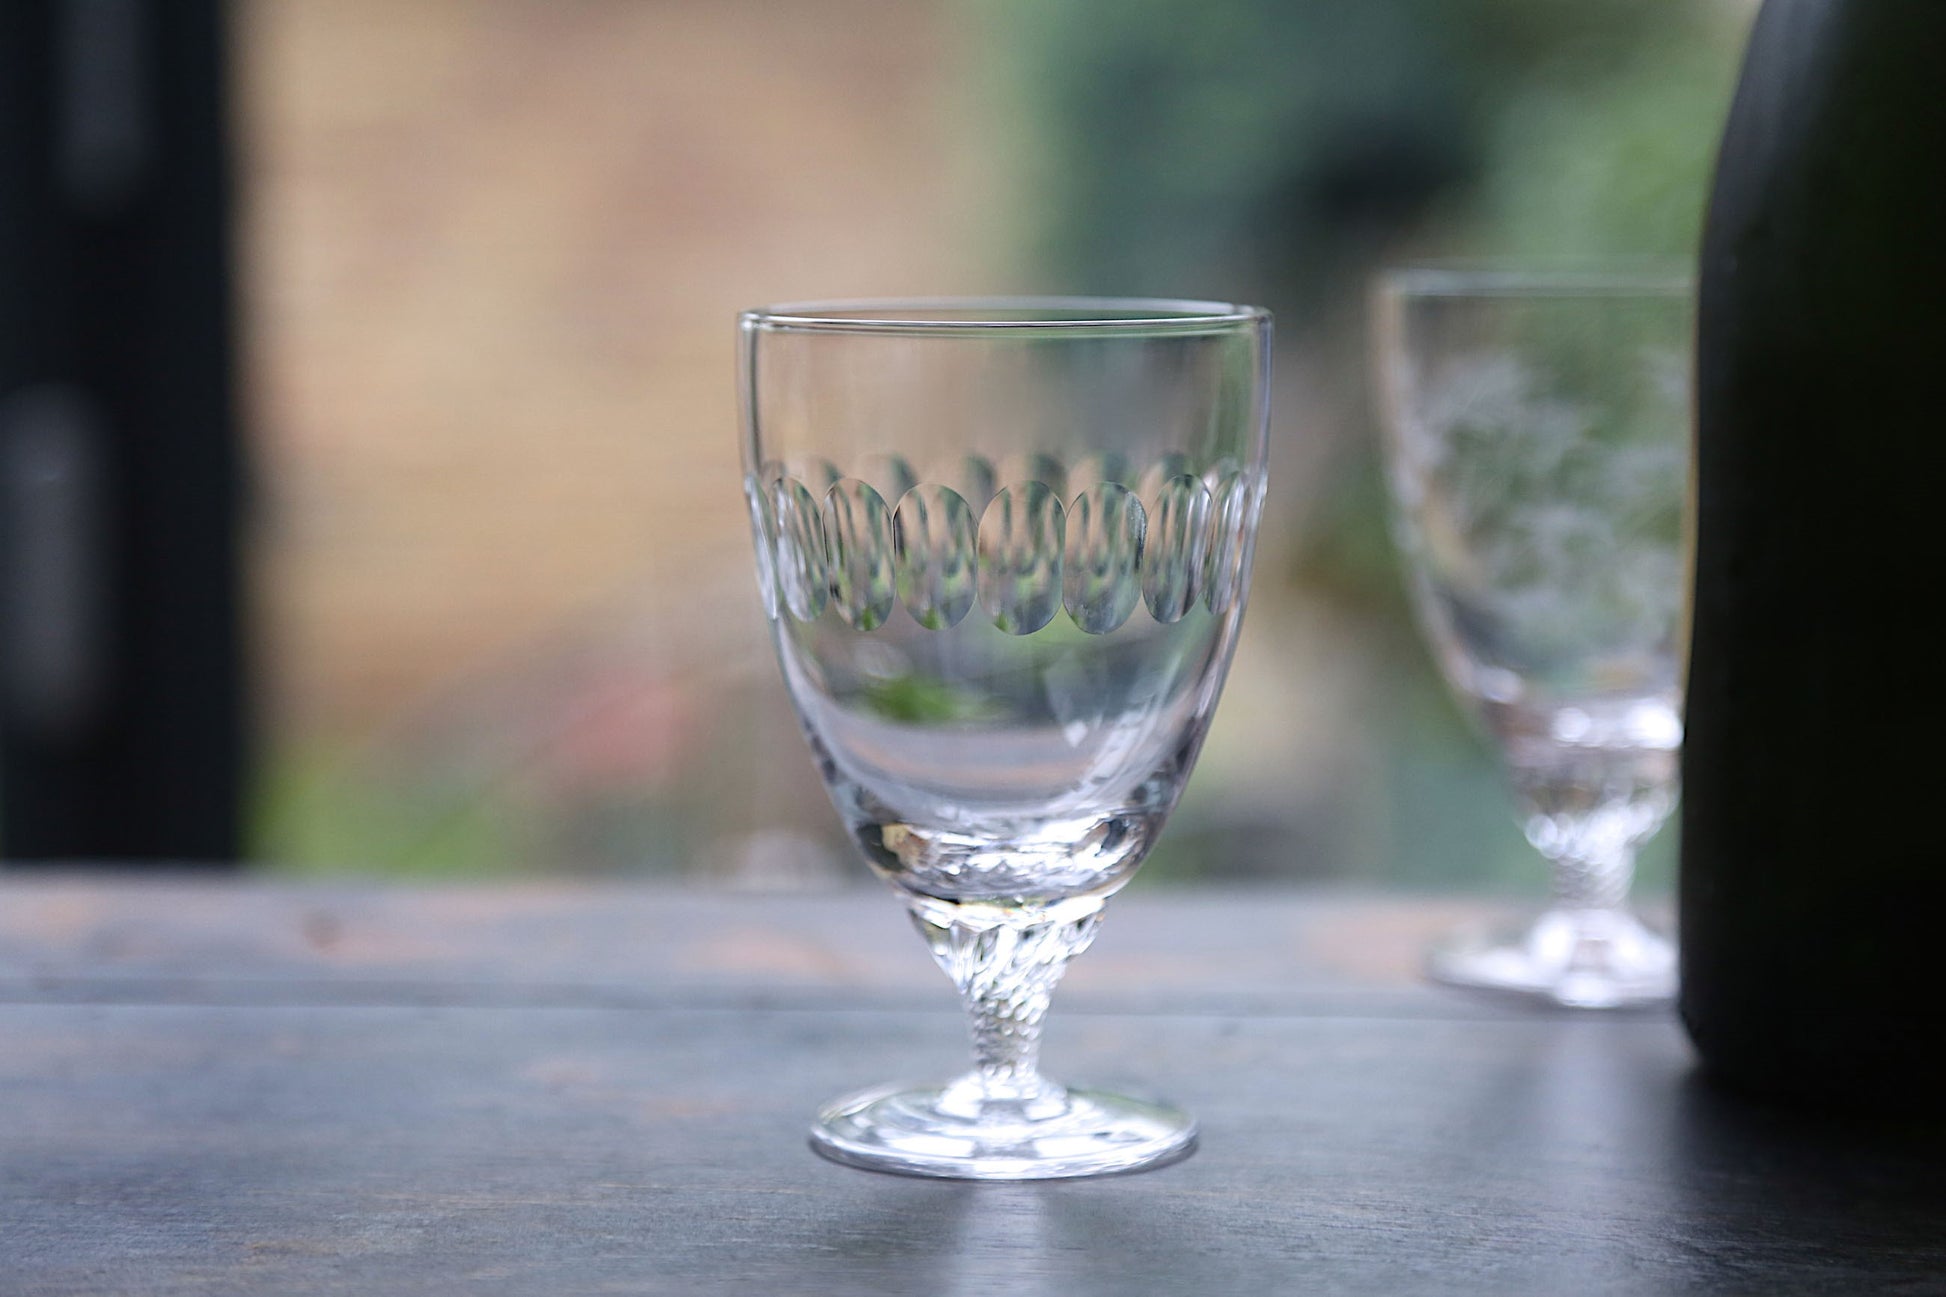 A French style bistro wine glass with an engraved band of connecting ovals.